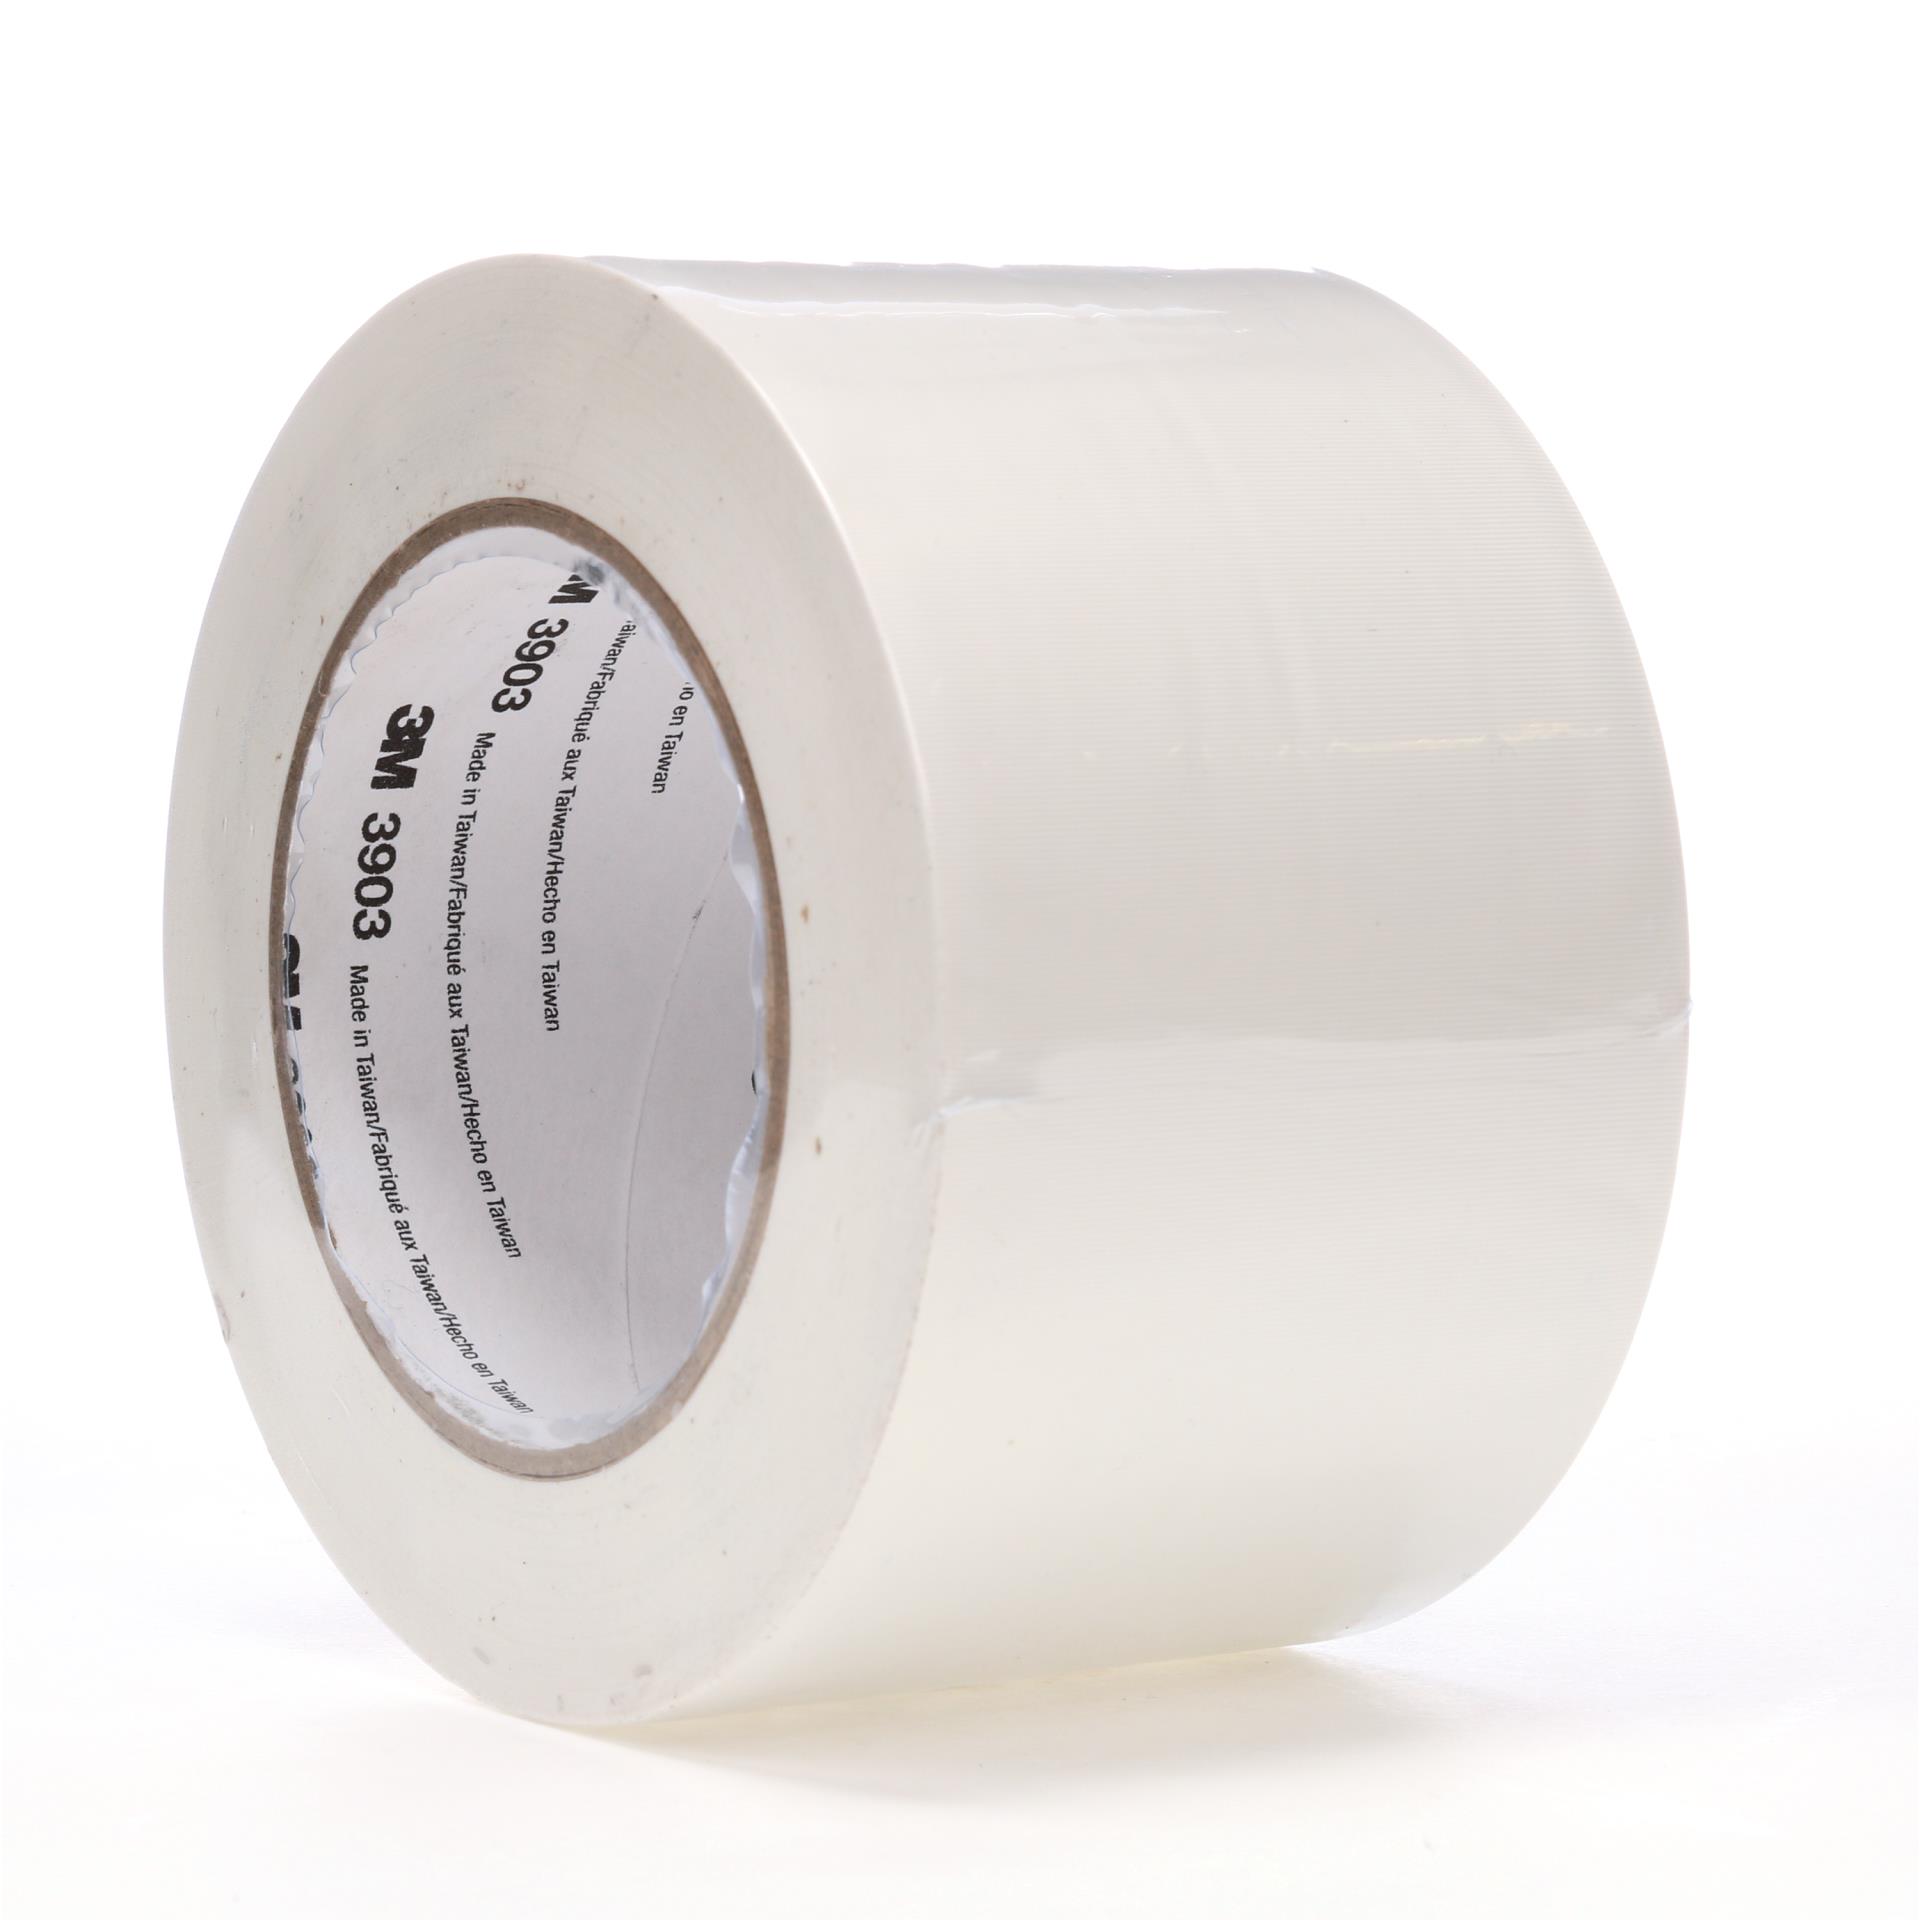 https://www.e-aircraftsupply.com/ItemImages/54/7100153654_3M_Vinyl_Duct_Tape_3903_White.jpg